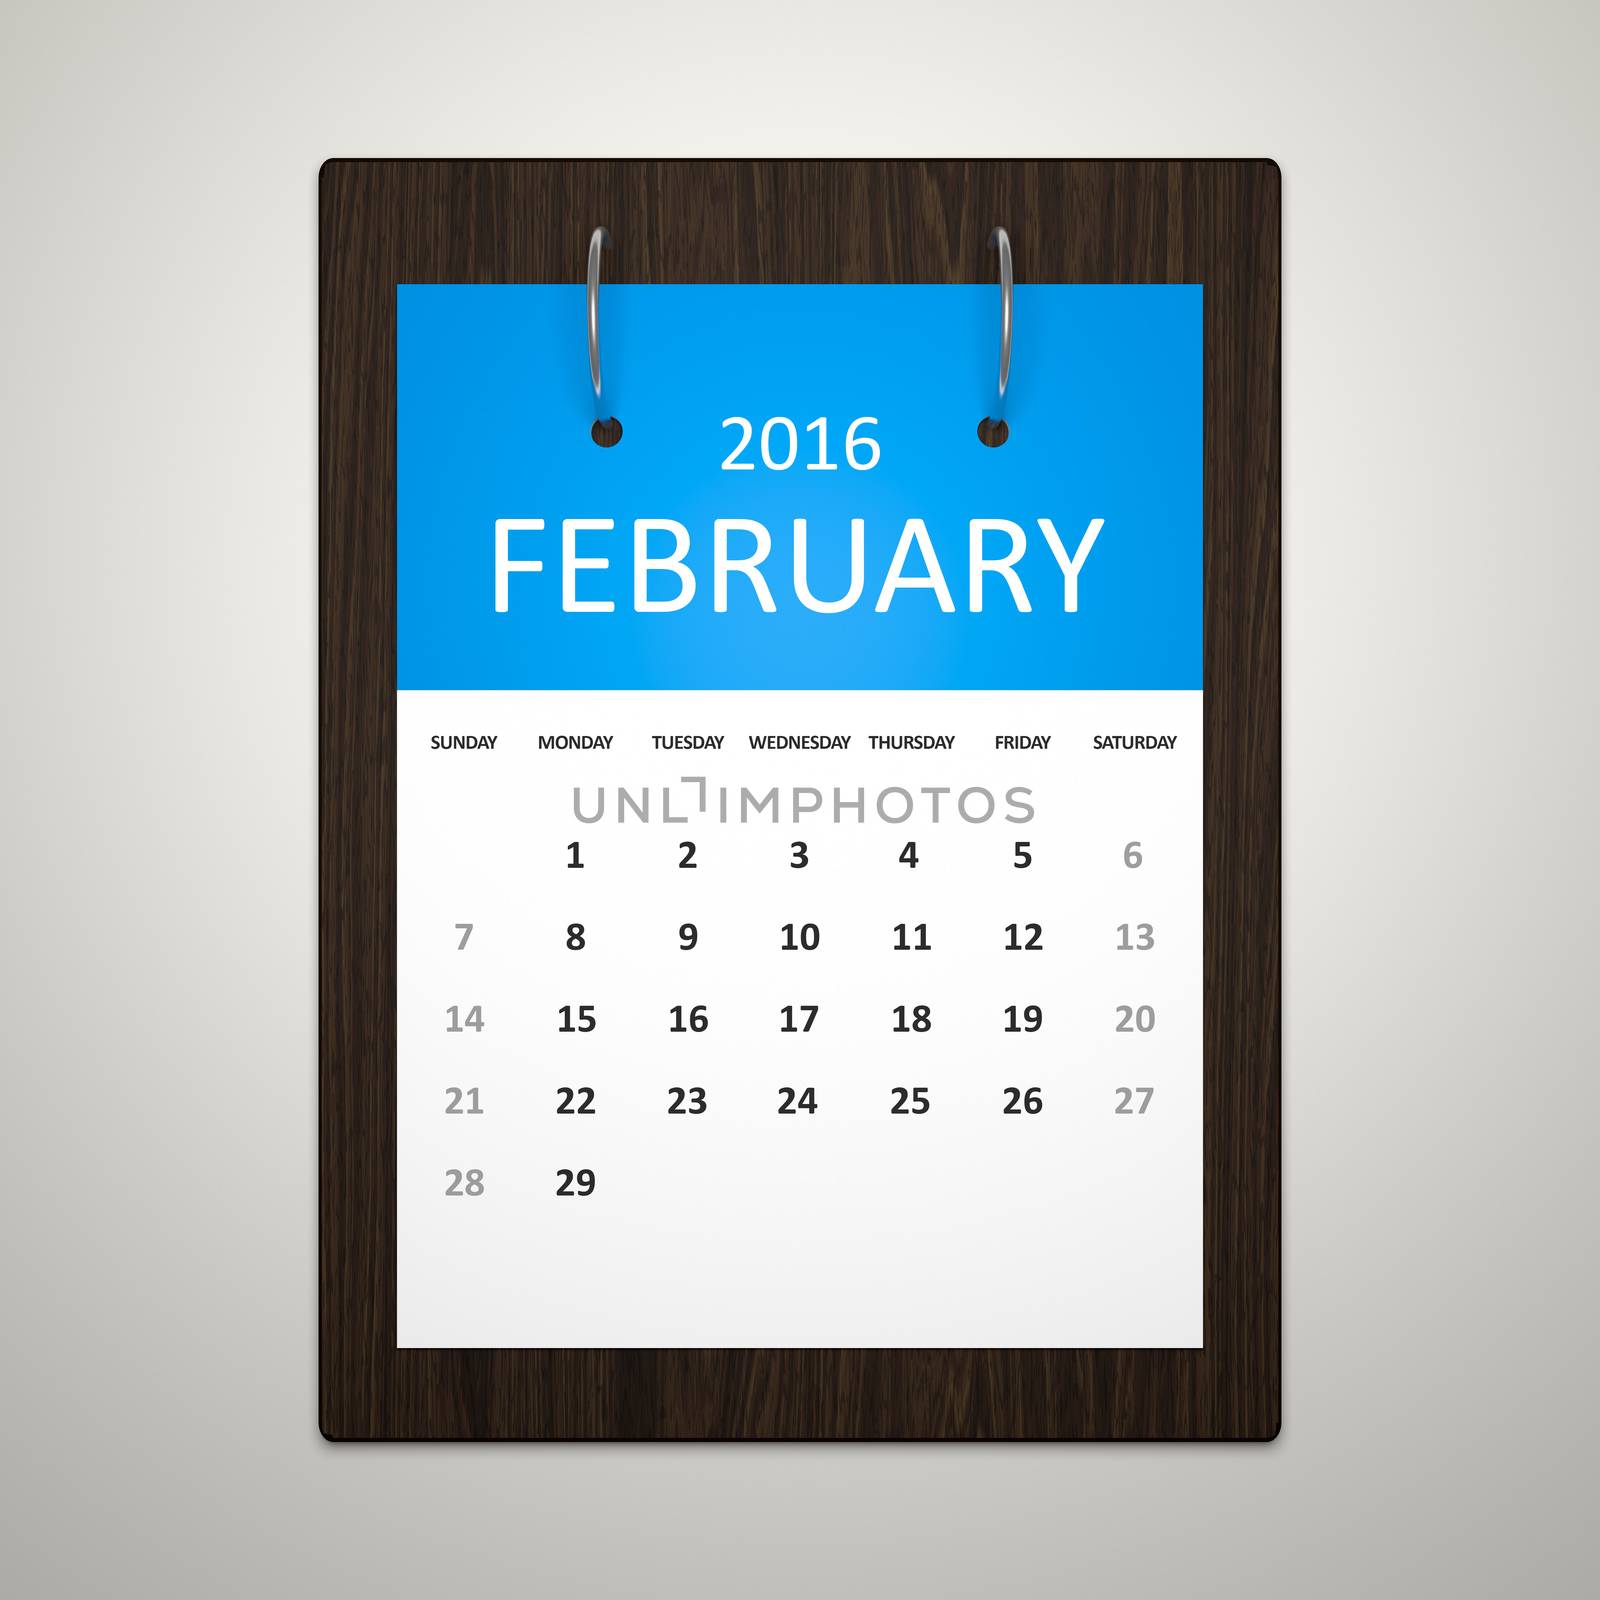 An image of a stylish calendar for event planning february 2016